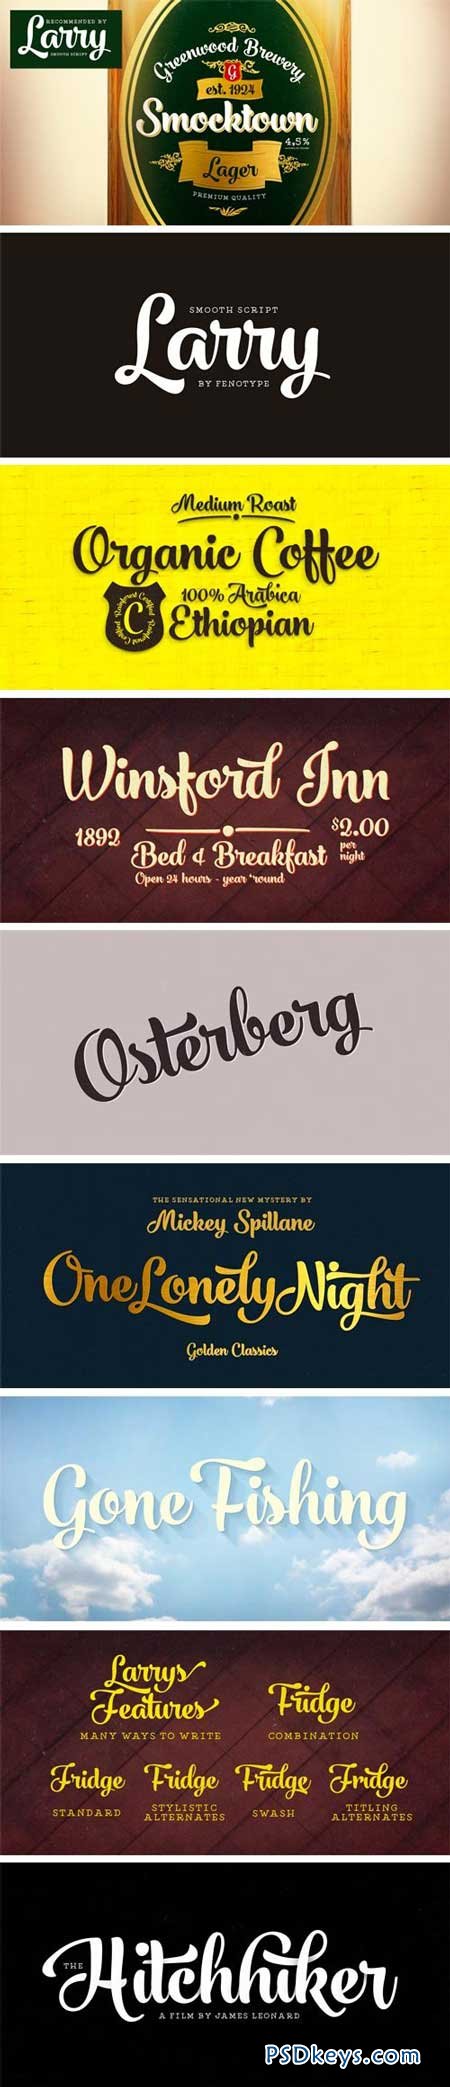 Larry Font Family - 3 Fonts for $45